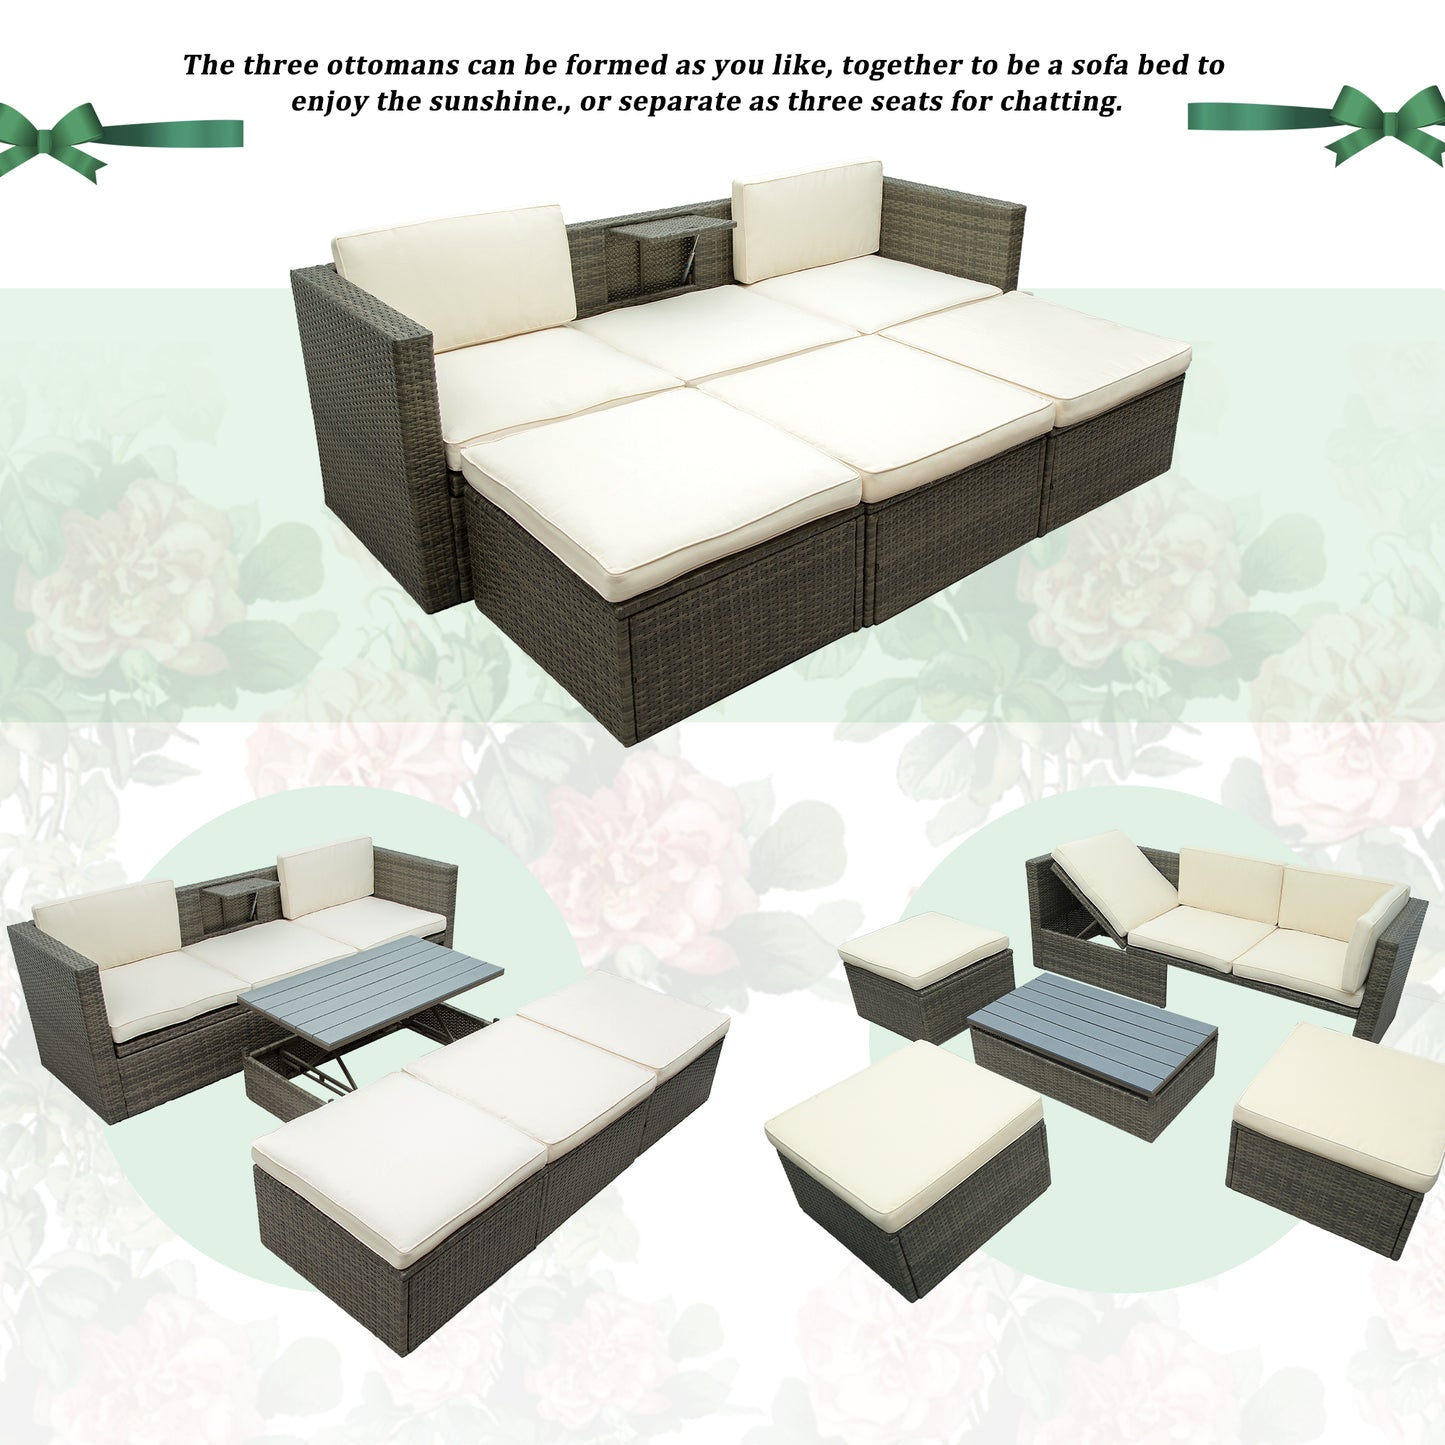 5PC Outdoor Sofa set w/Lift-top Coffee Table Beige